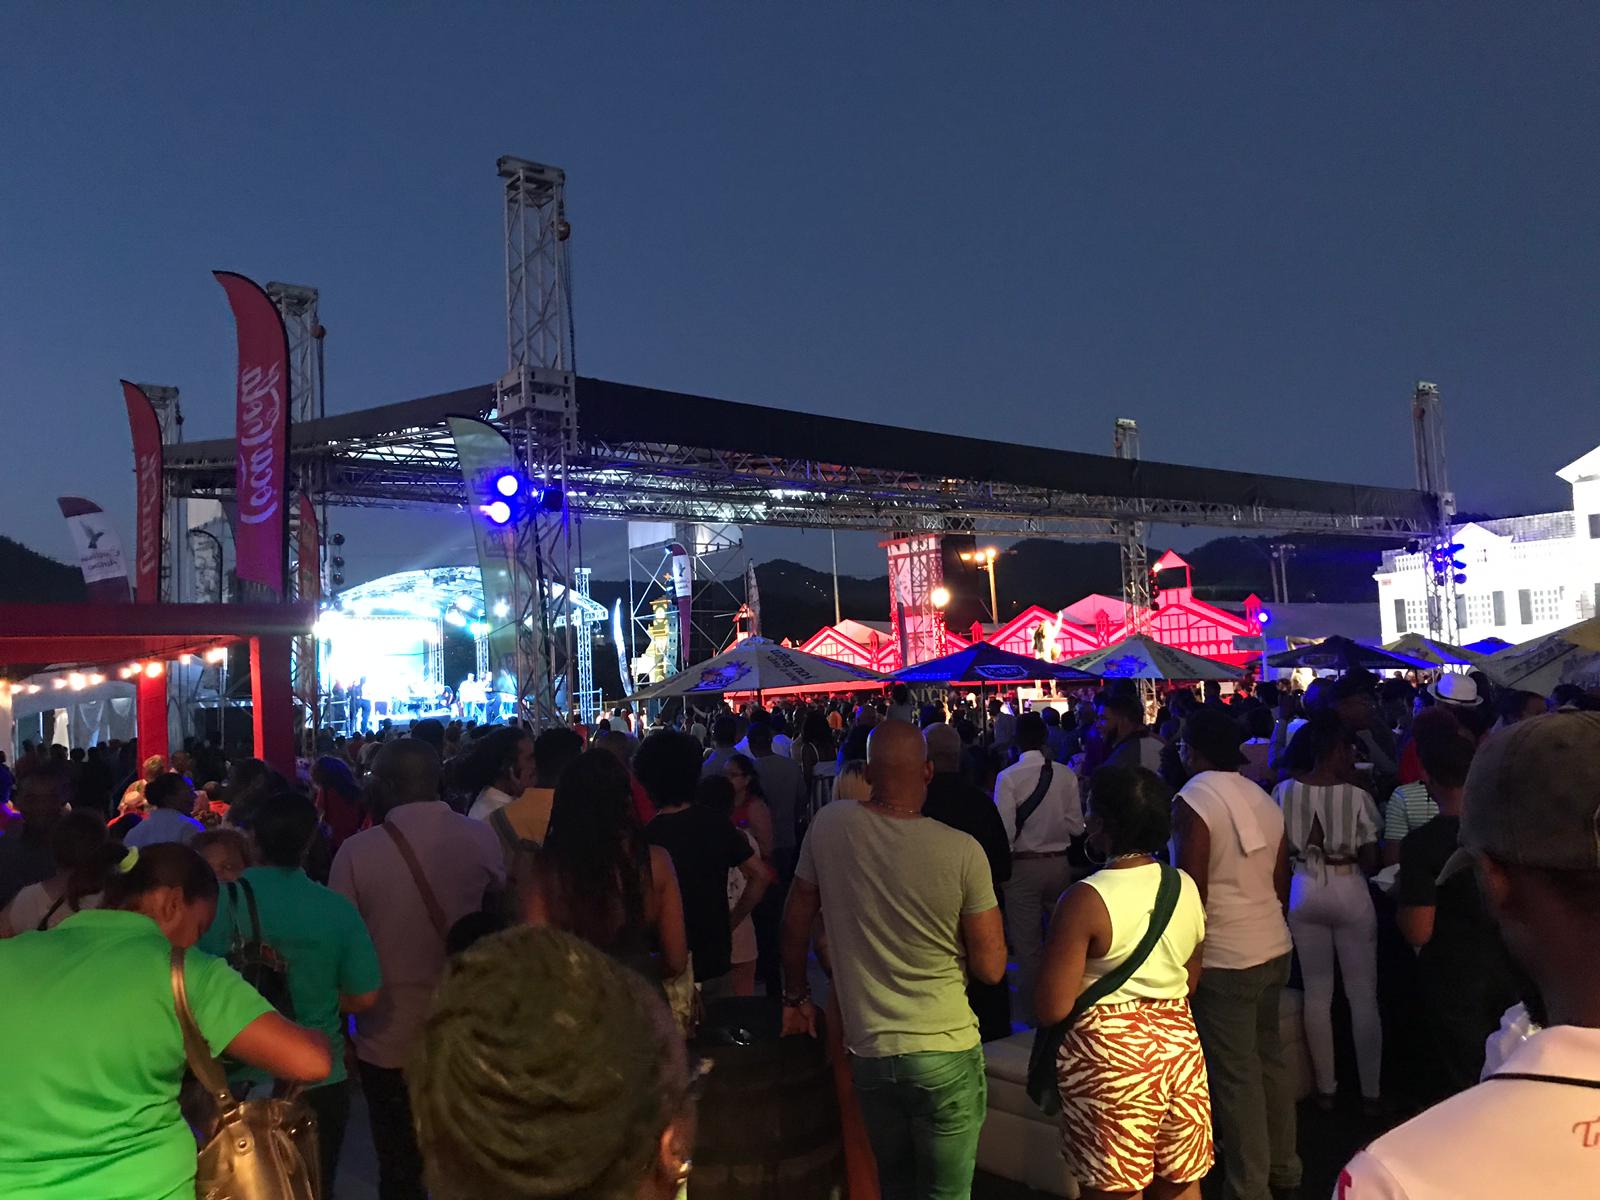 Carifesta patrons turned away on T&T’s country night